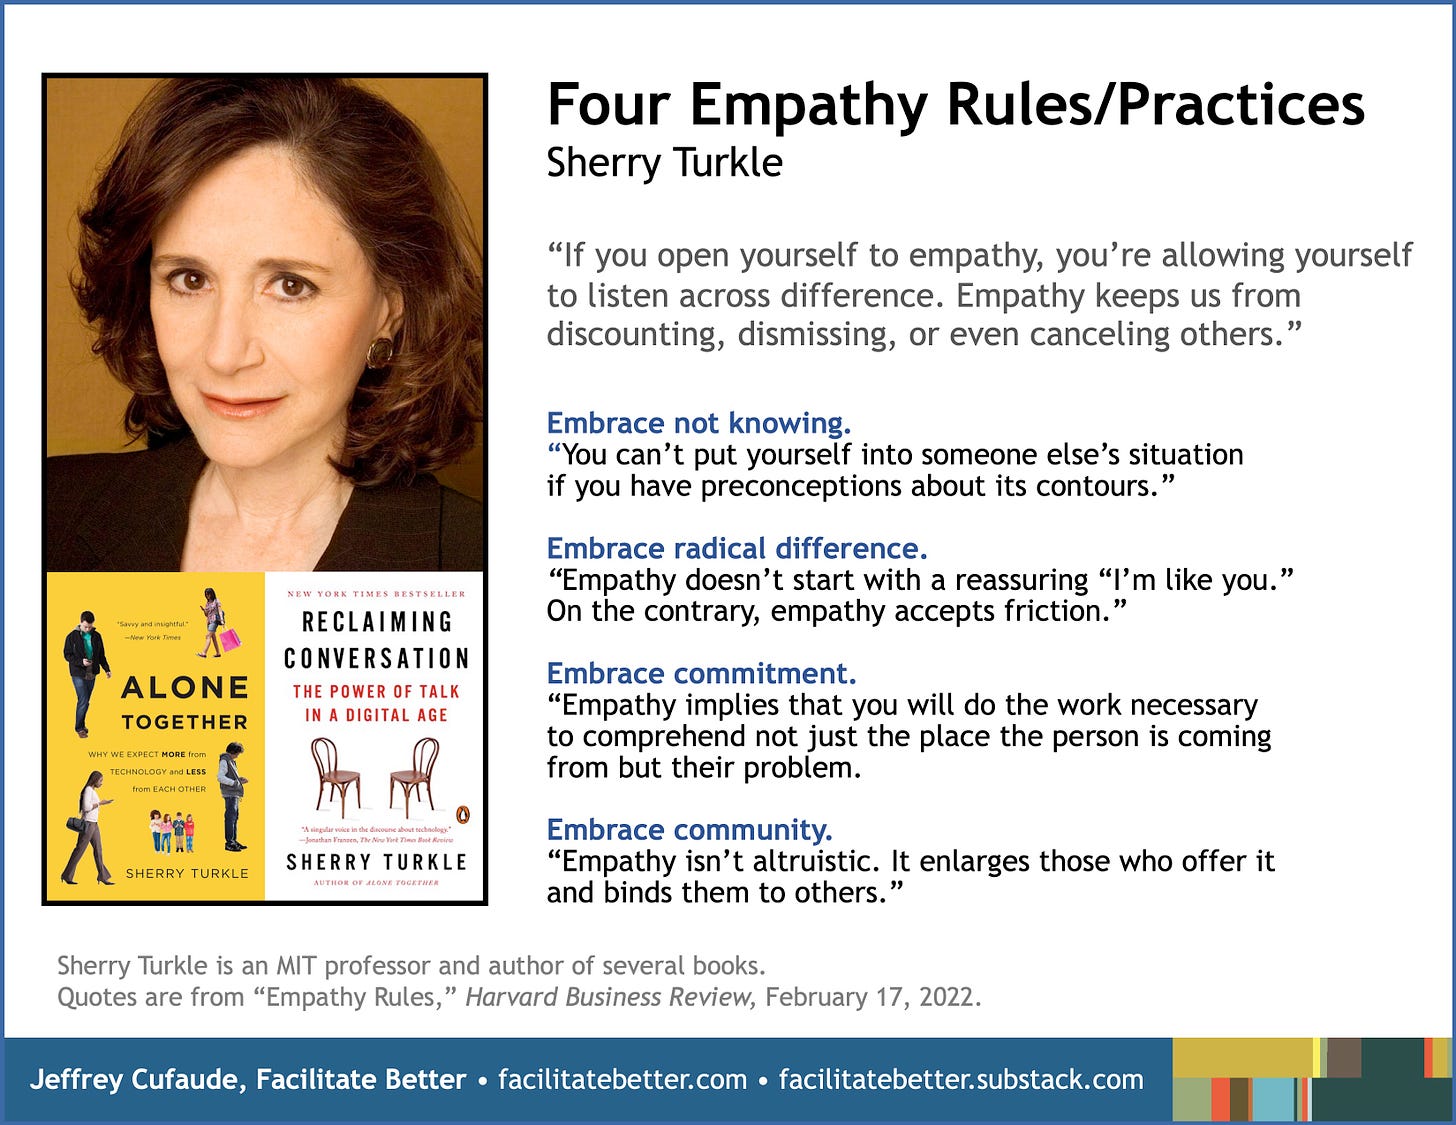 On the left is a picture of Sherry Turkle with images of two book dust jackets below her: (1) Alone Together and (2) Reclaiming Conversation.   To the right of these images is this text:   Four Empathy Rules/Practices Sherry Turkle  “If you open yourself to empathy, you’re allowing yourself to listen across difference. Empathy keeps us from discounting, dismissing, or even canceling others.”   Embrace not knowing. “You can’t put yourself into someone else’s situation if you have preconceptions about its contours.”  Embrace radical difference. “Empathy doesn’t start with a reassuring “I’m like you.” On the contrary, empathy accepts friction.”  Embrace commitment.  “Empathy implies that you will do the work necessary to comprehend not just the place the person is coming from but their problem.   Embrace community. “Empathy isn’t altruistic. It enlarges those who offer it and binds them to others.”   Sherry Turkle is an MIT professor and author of several books.  Quotes are from “Empathy Rules,” Harvard Business Review, February 17, 2022.       